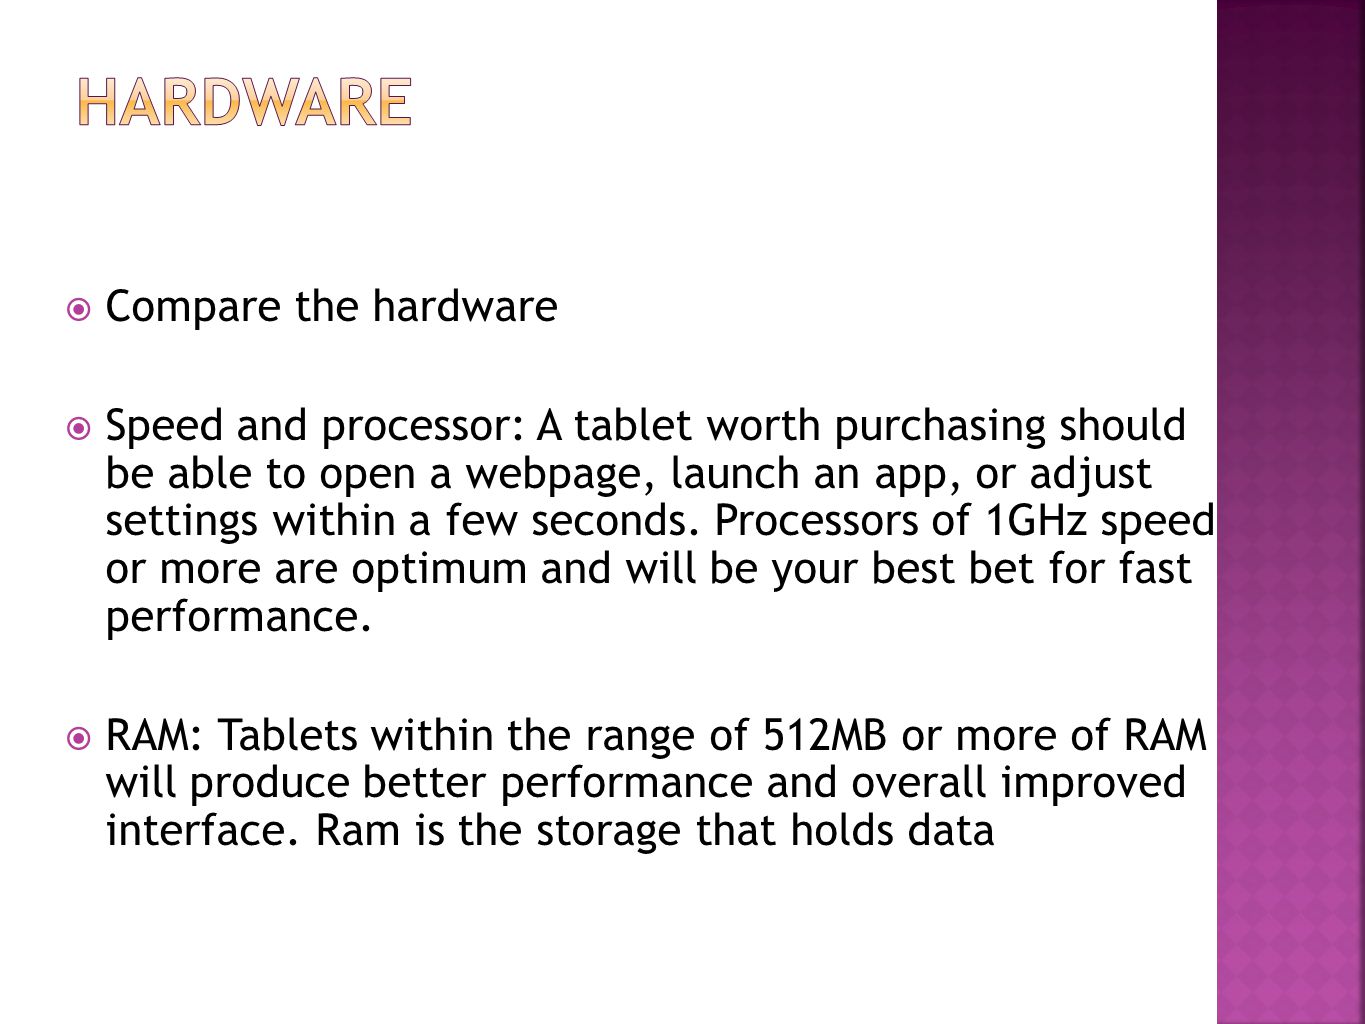  Compare the hardware  Speed and processor: A tablet worth purchasing should be able to open a webpage, launch an app, or adjust settings within a few seconds.